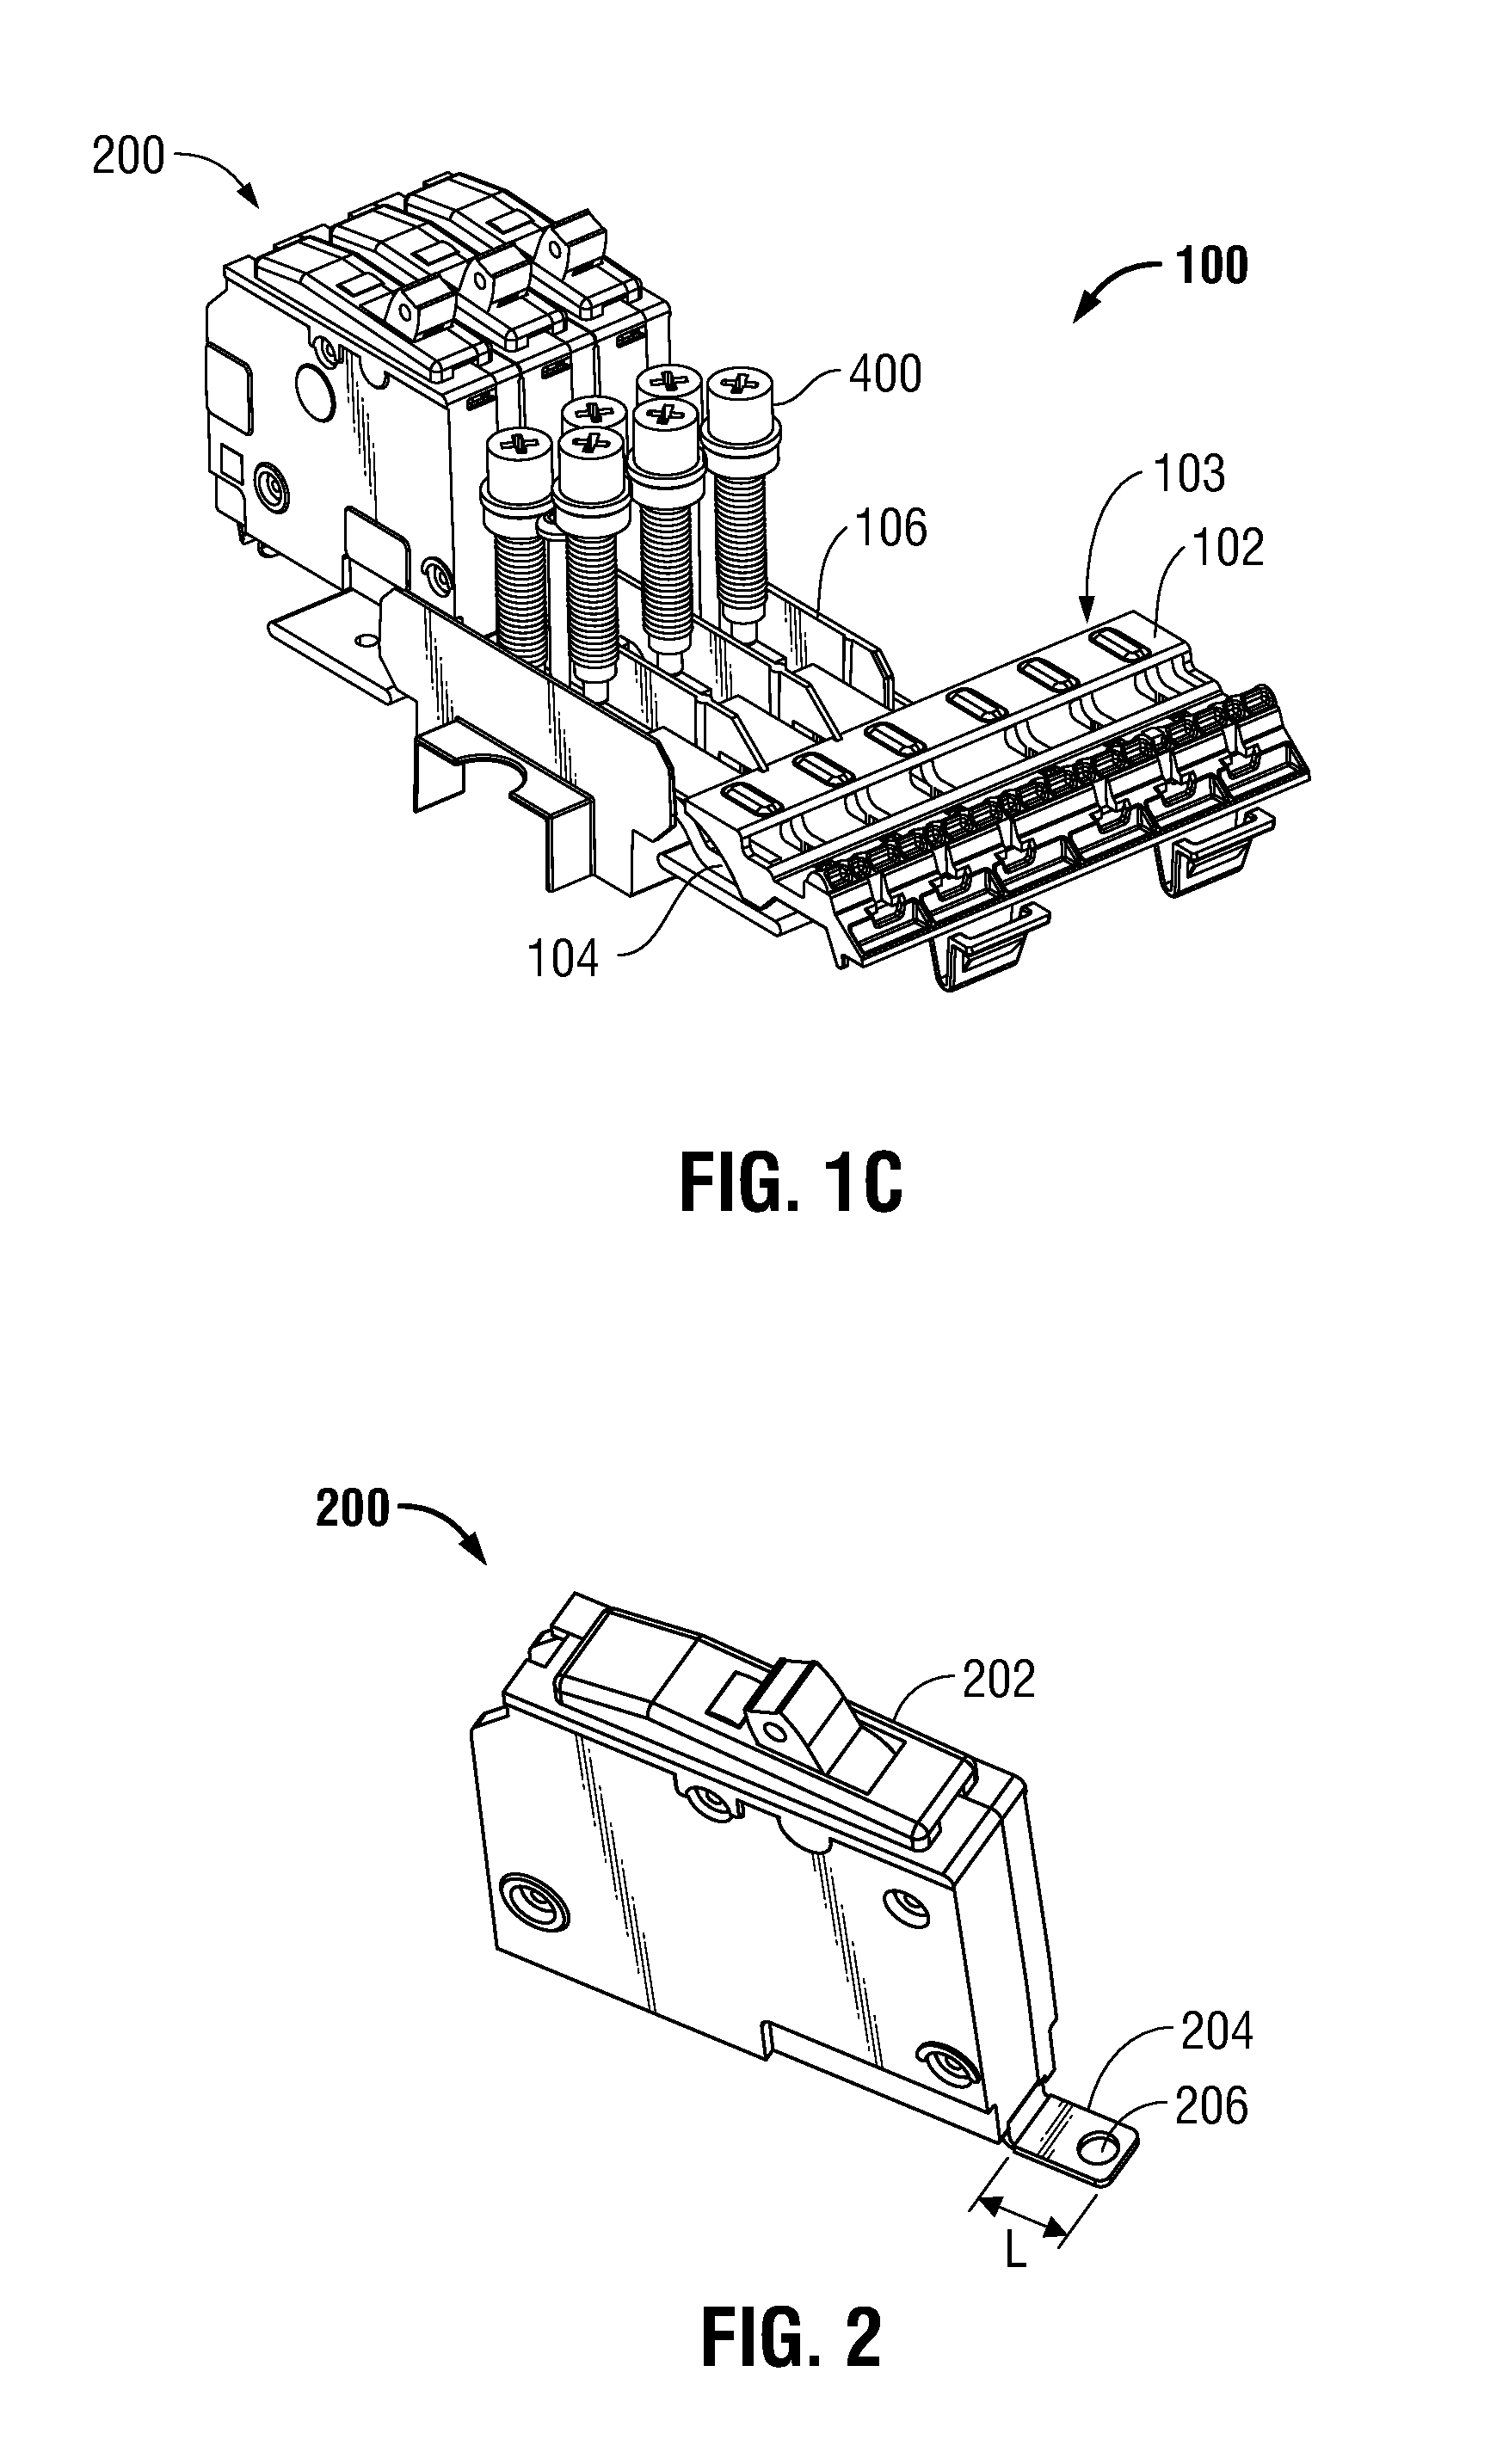 Isolated bolt-on circuit breaker system for an energized panelboard